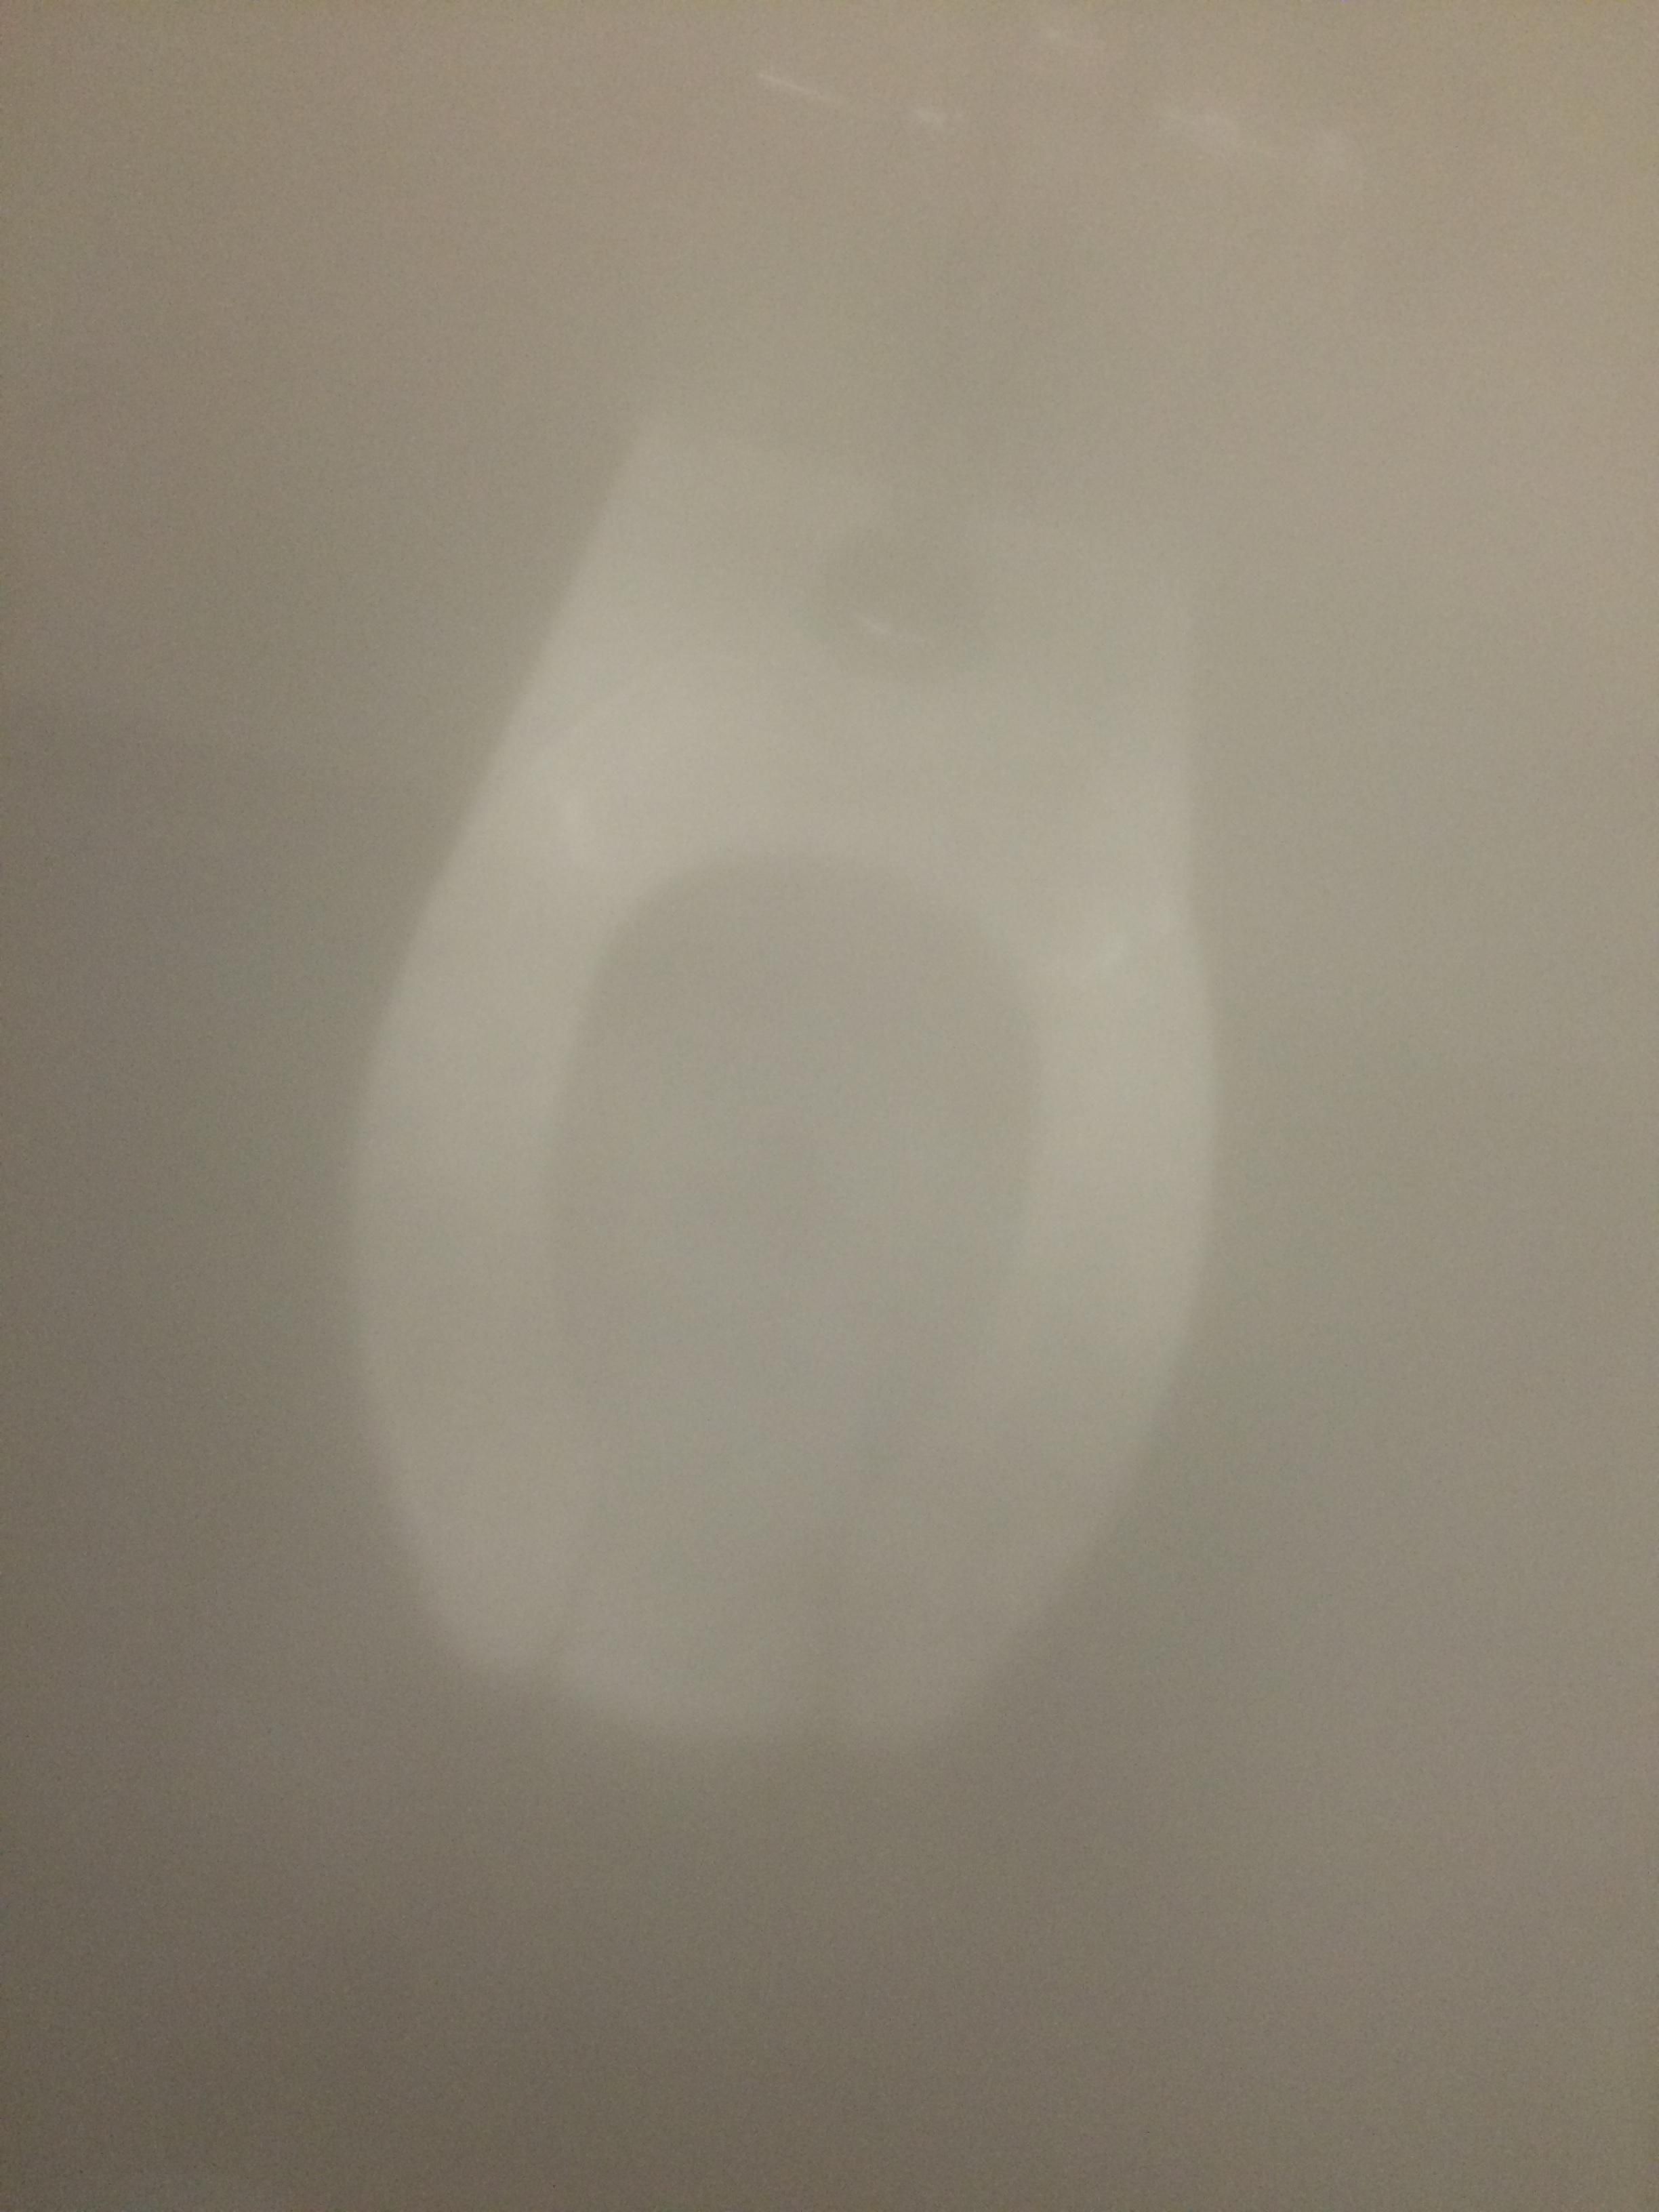 This photo was taken through my university's Toilet Paper. Wiping is like russian roulette with 5 rounds loaded